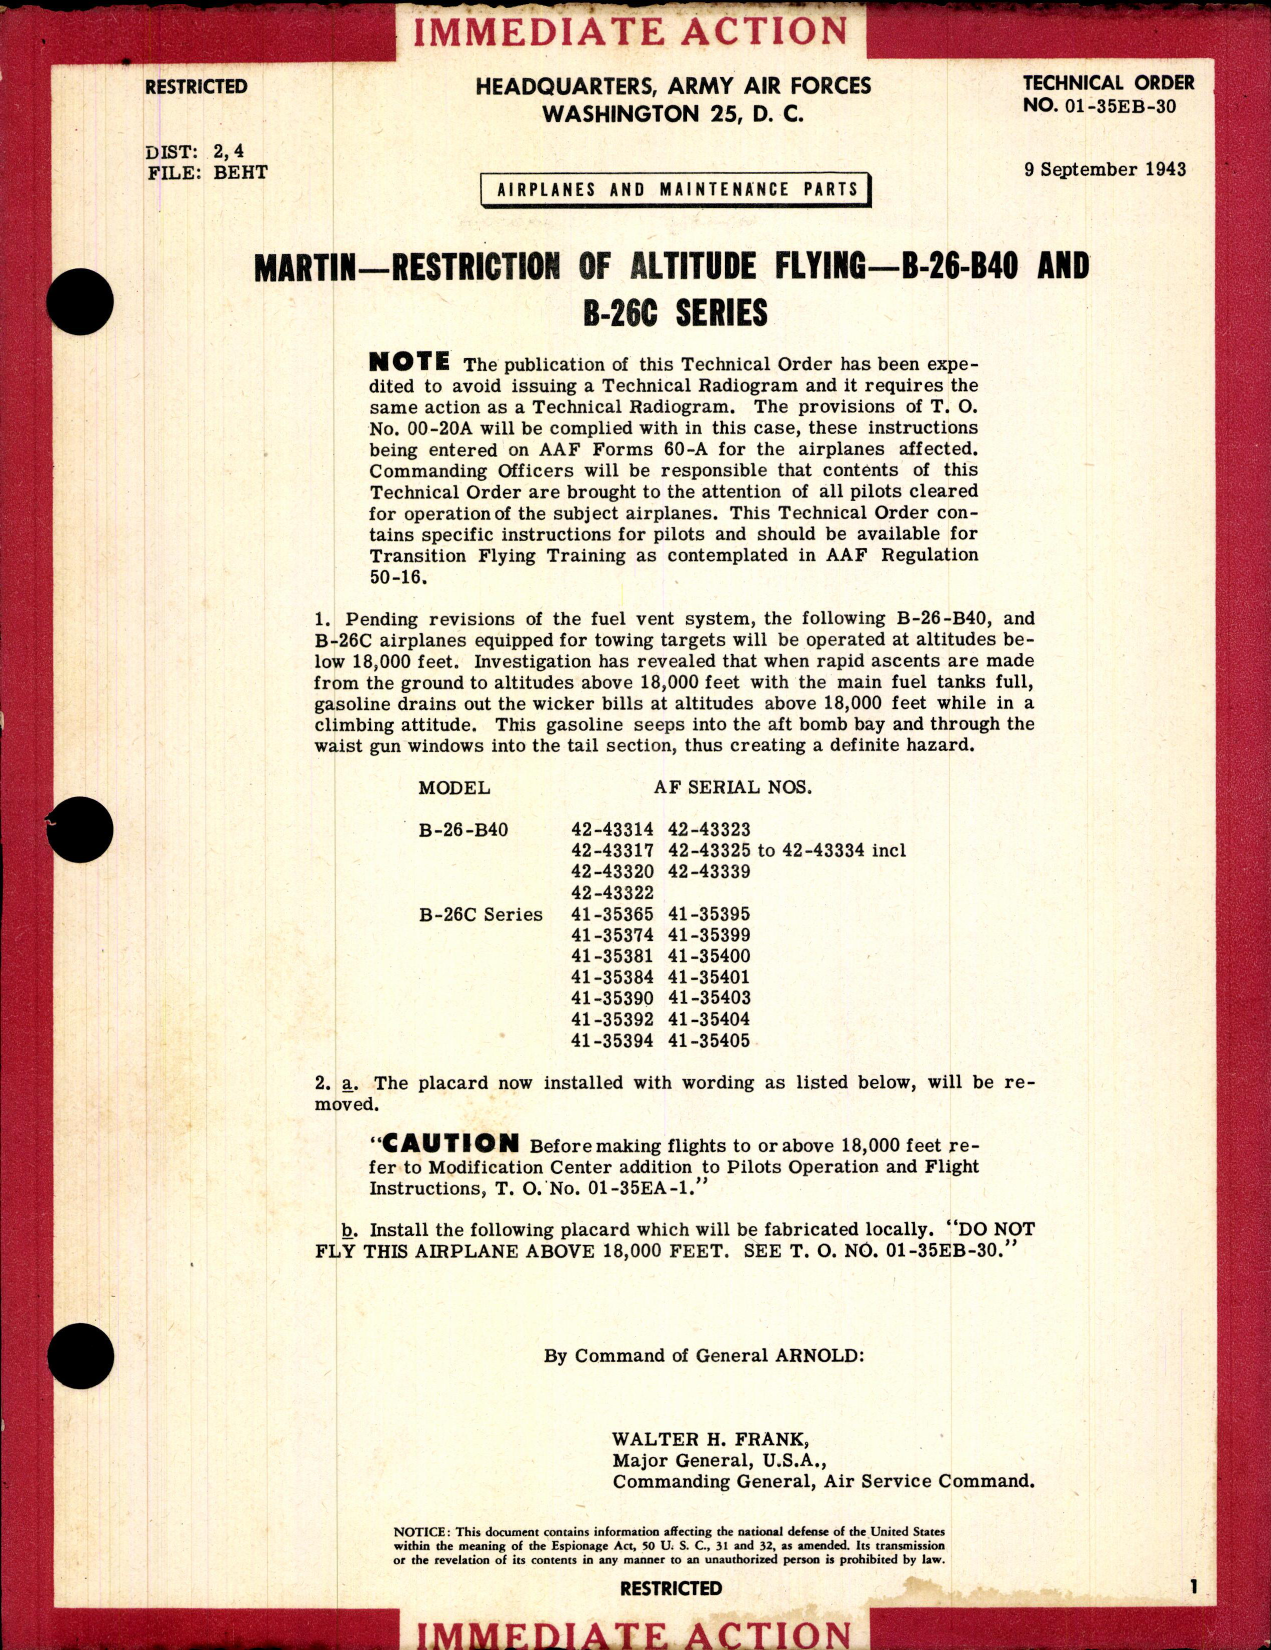 Sample page 1 from AirCorps Library document: Restriction of Altitude Flying for B-26-B40 and B-26C Series